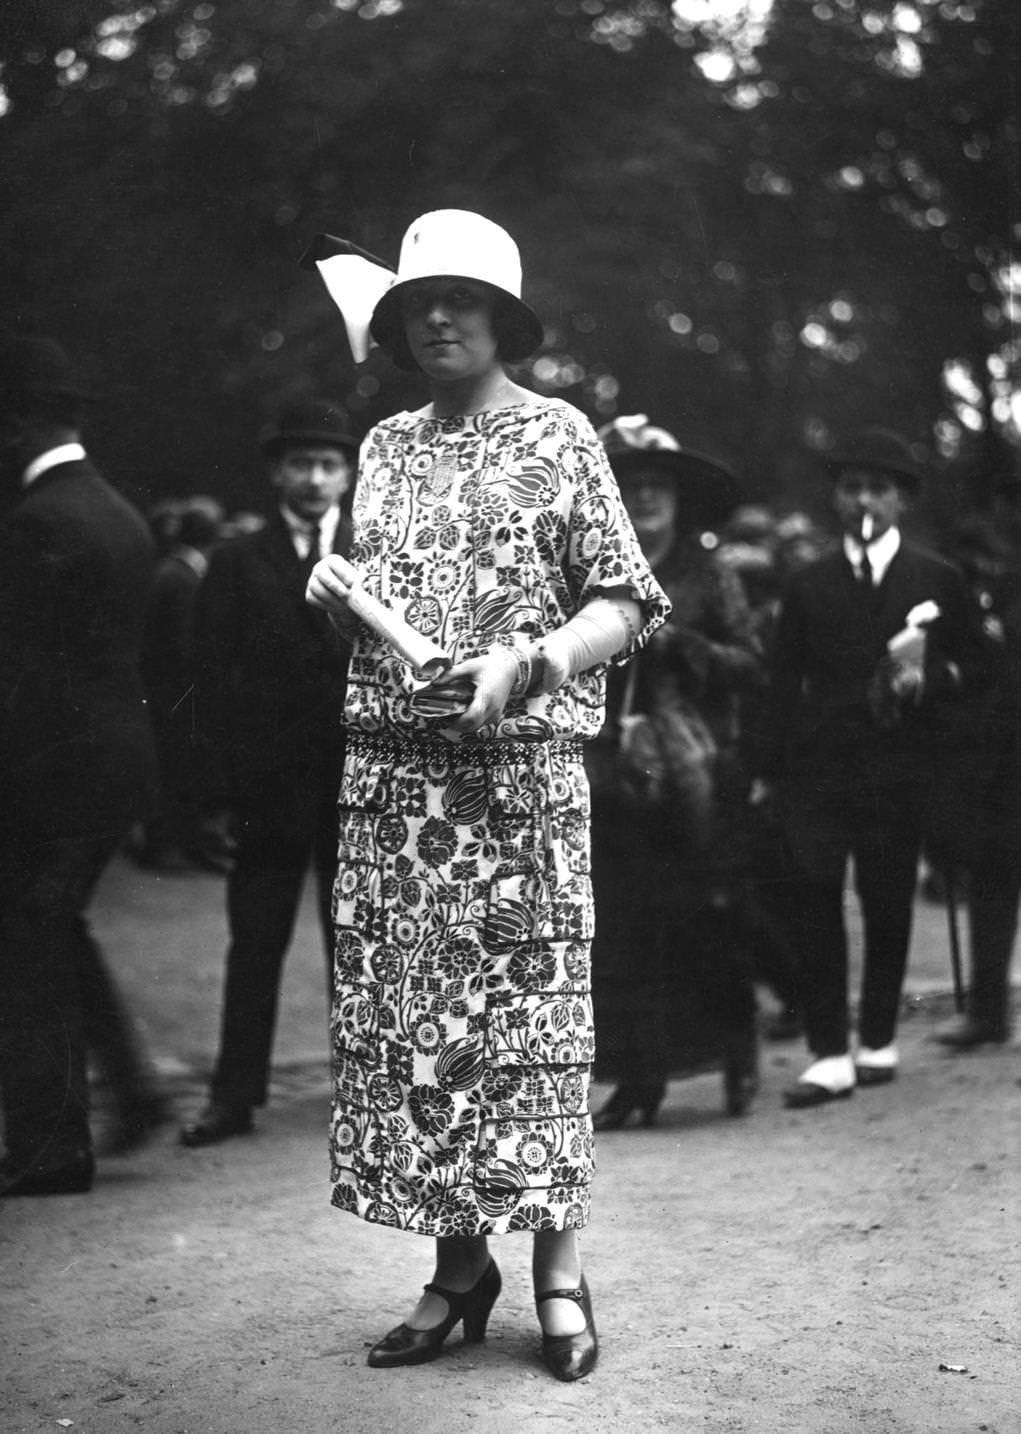 Drop-waisted ankle length dress in multi-patterned material with three-quarter sleeves and elbow length gloves. Worn with a cloche hat decorated with a bow. One-bar shoes, 1923